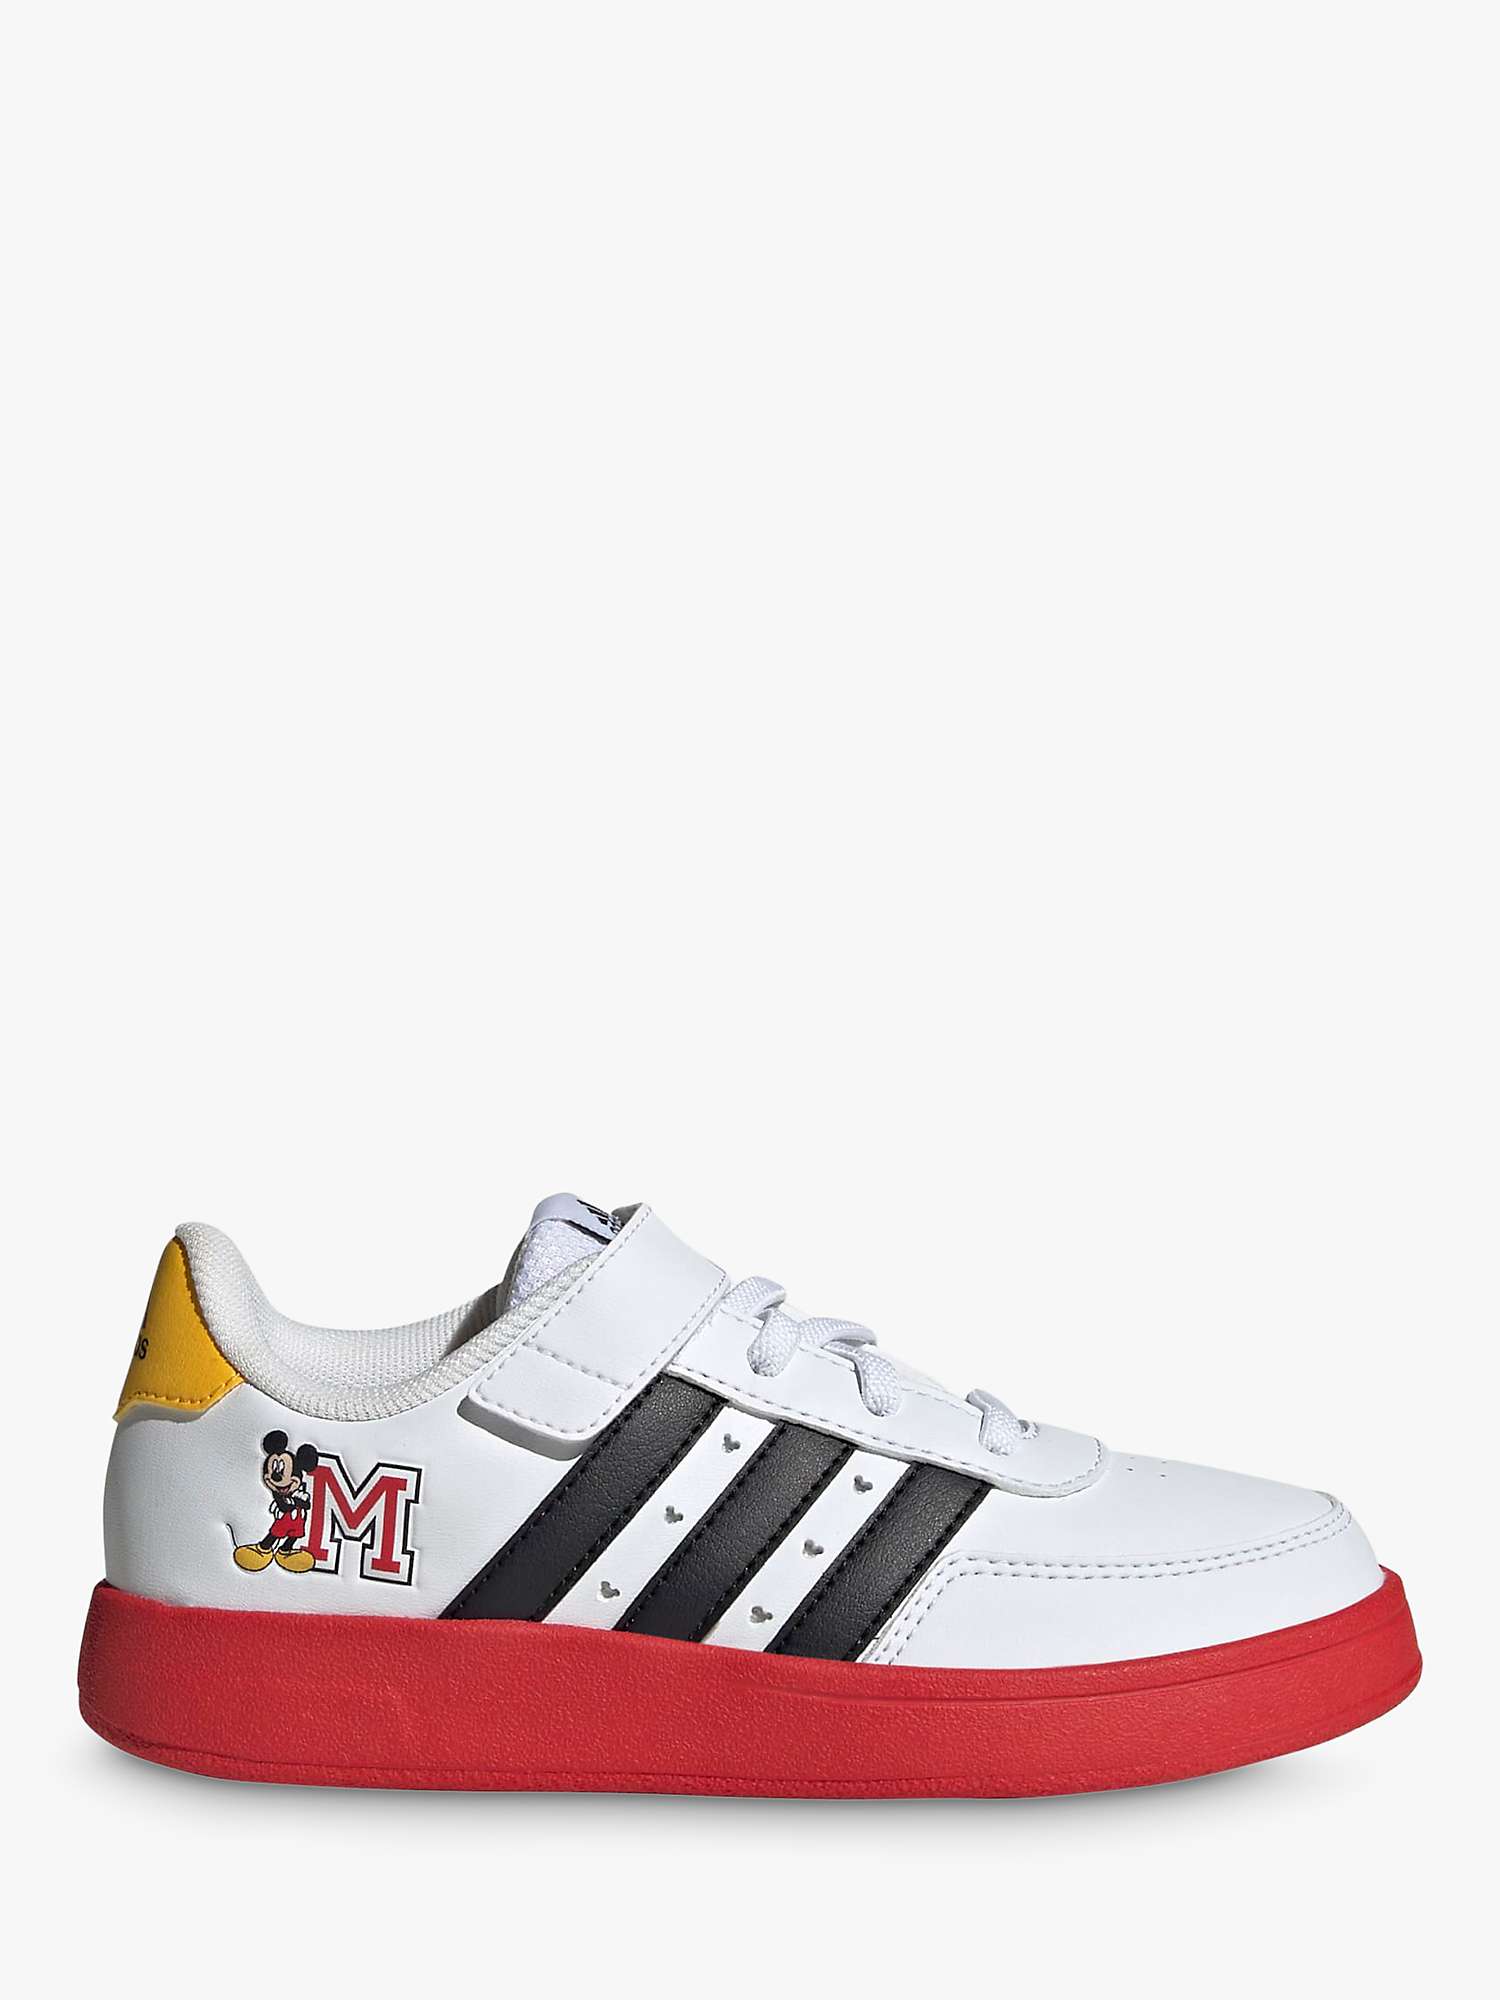 Buy adidas Kids' Breaknet 2.0 X Disney Mickey Graphic Trainers, White/Black/Red Online at johnlewis.com